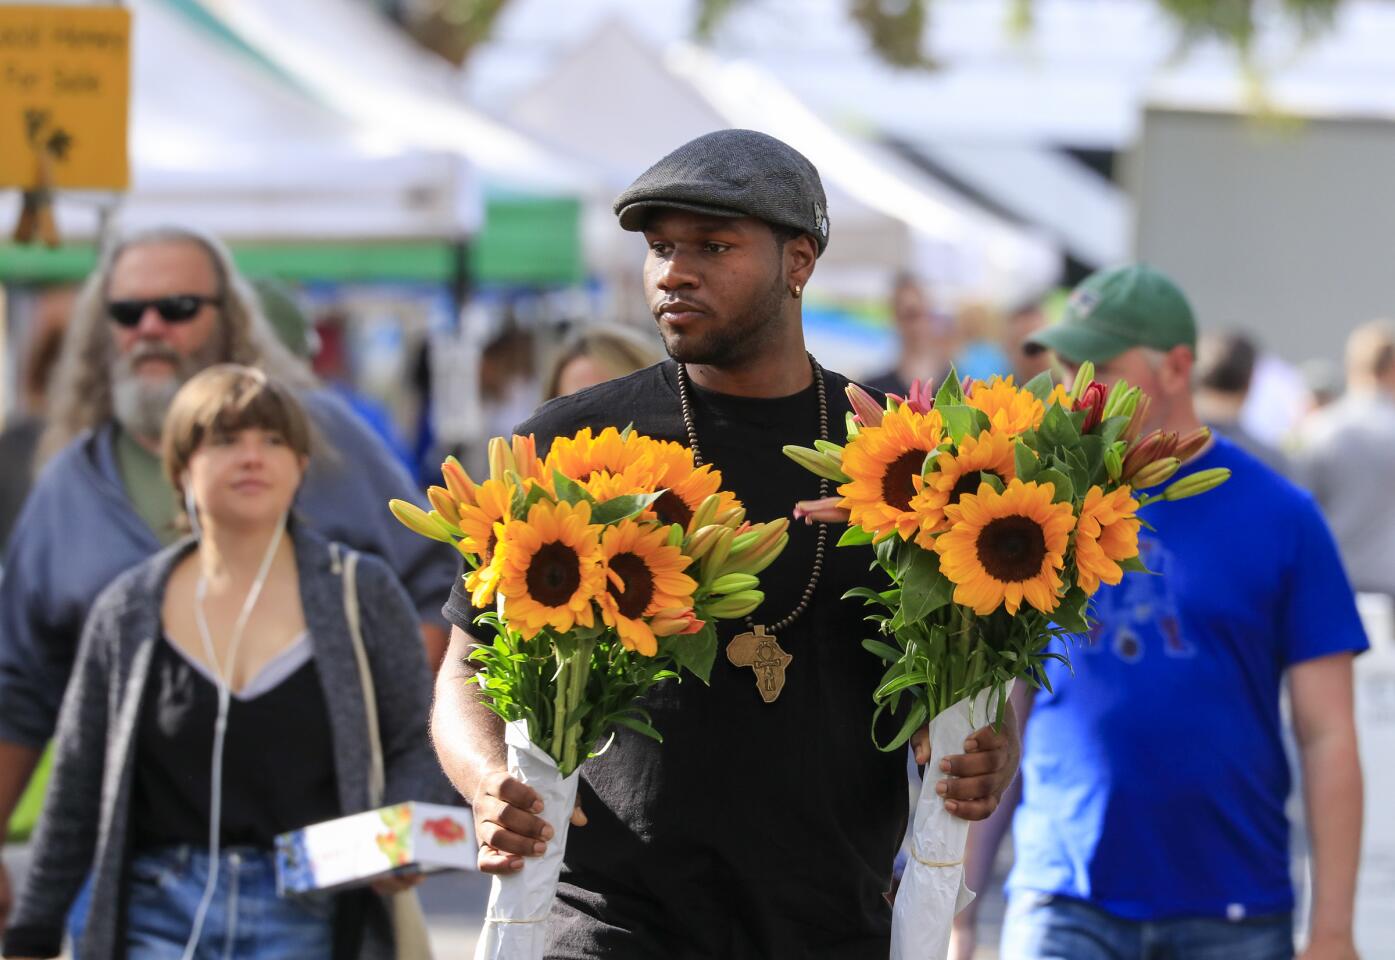 Customer Steven Russell carries two sunflower bouquets through the Claremont Farmers & Artisans Market in the heart of the Claremont Village in the city of Claremont.